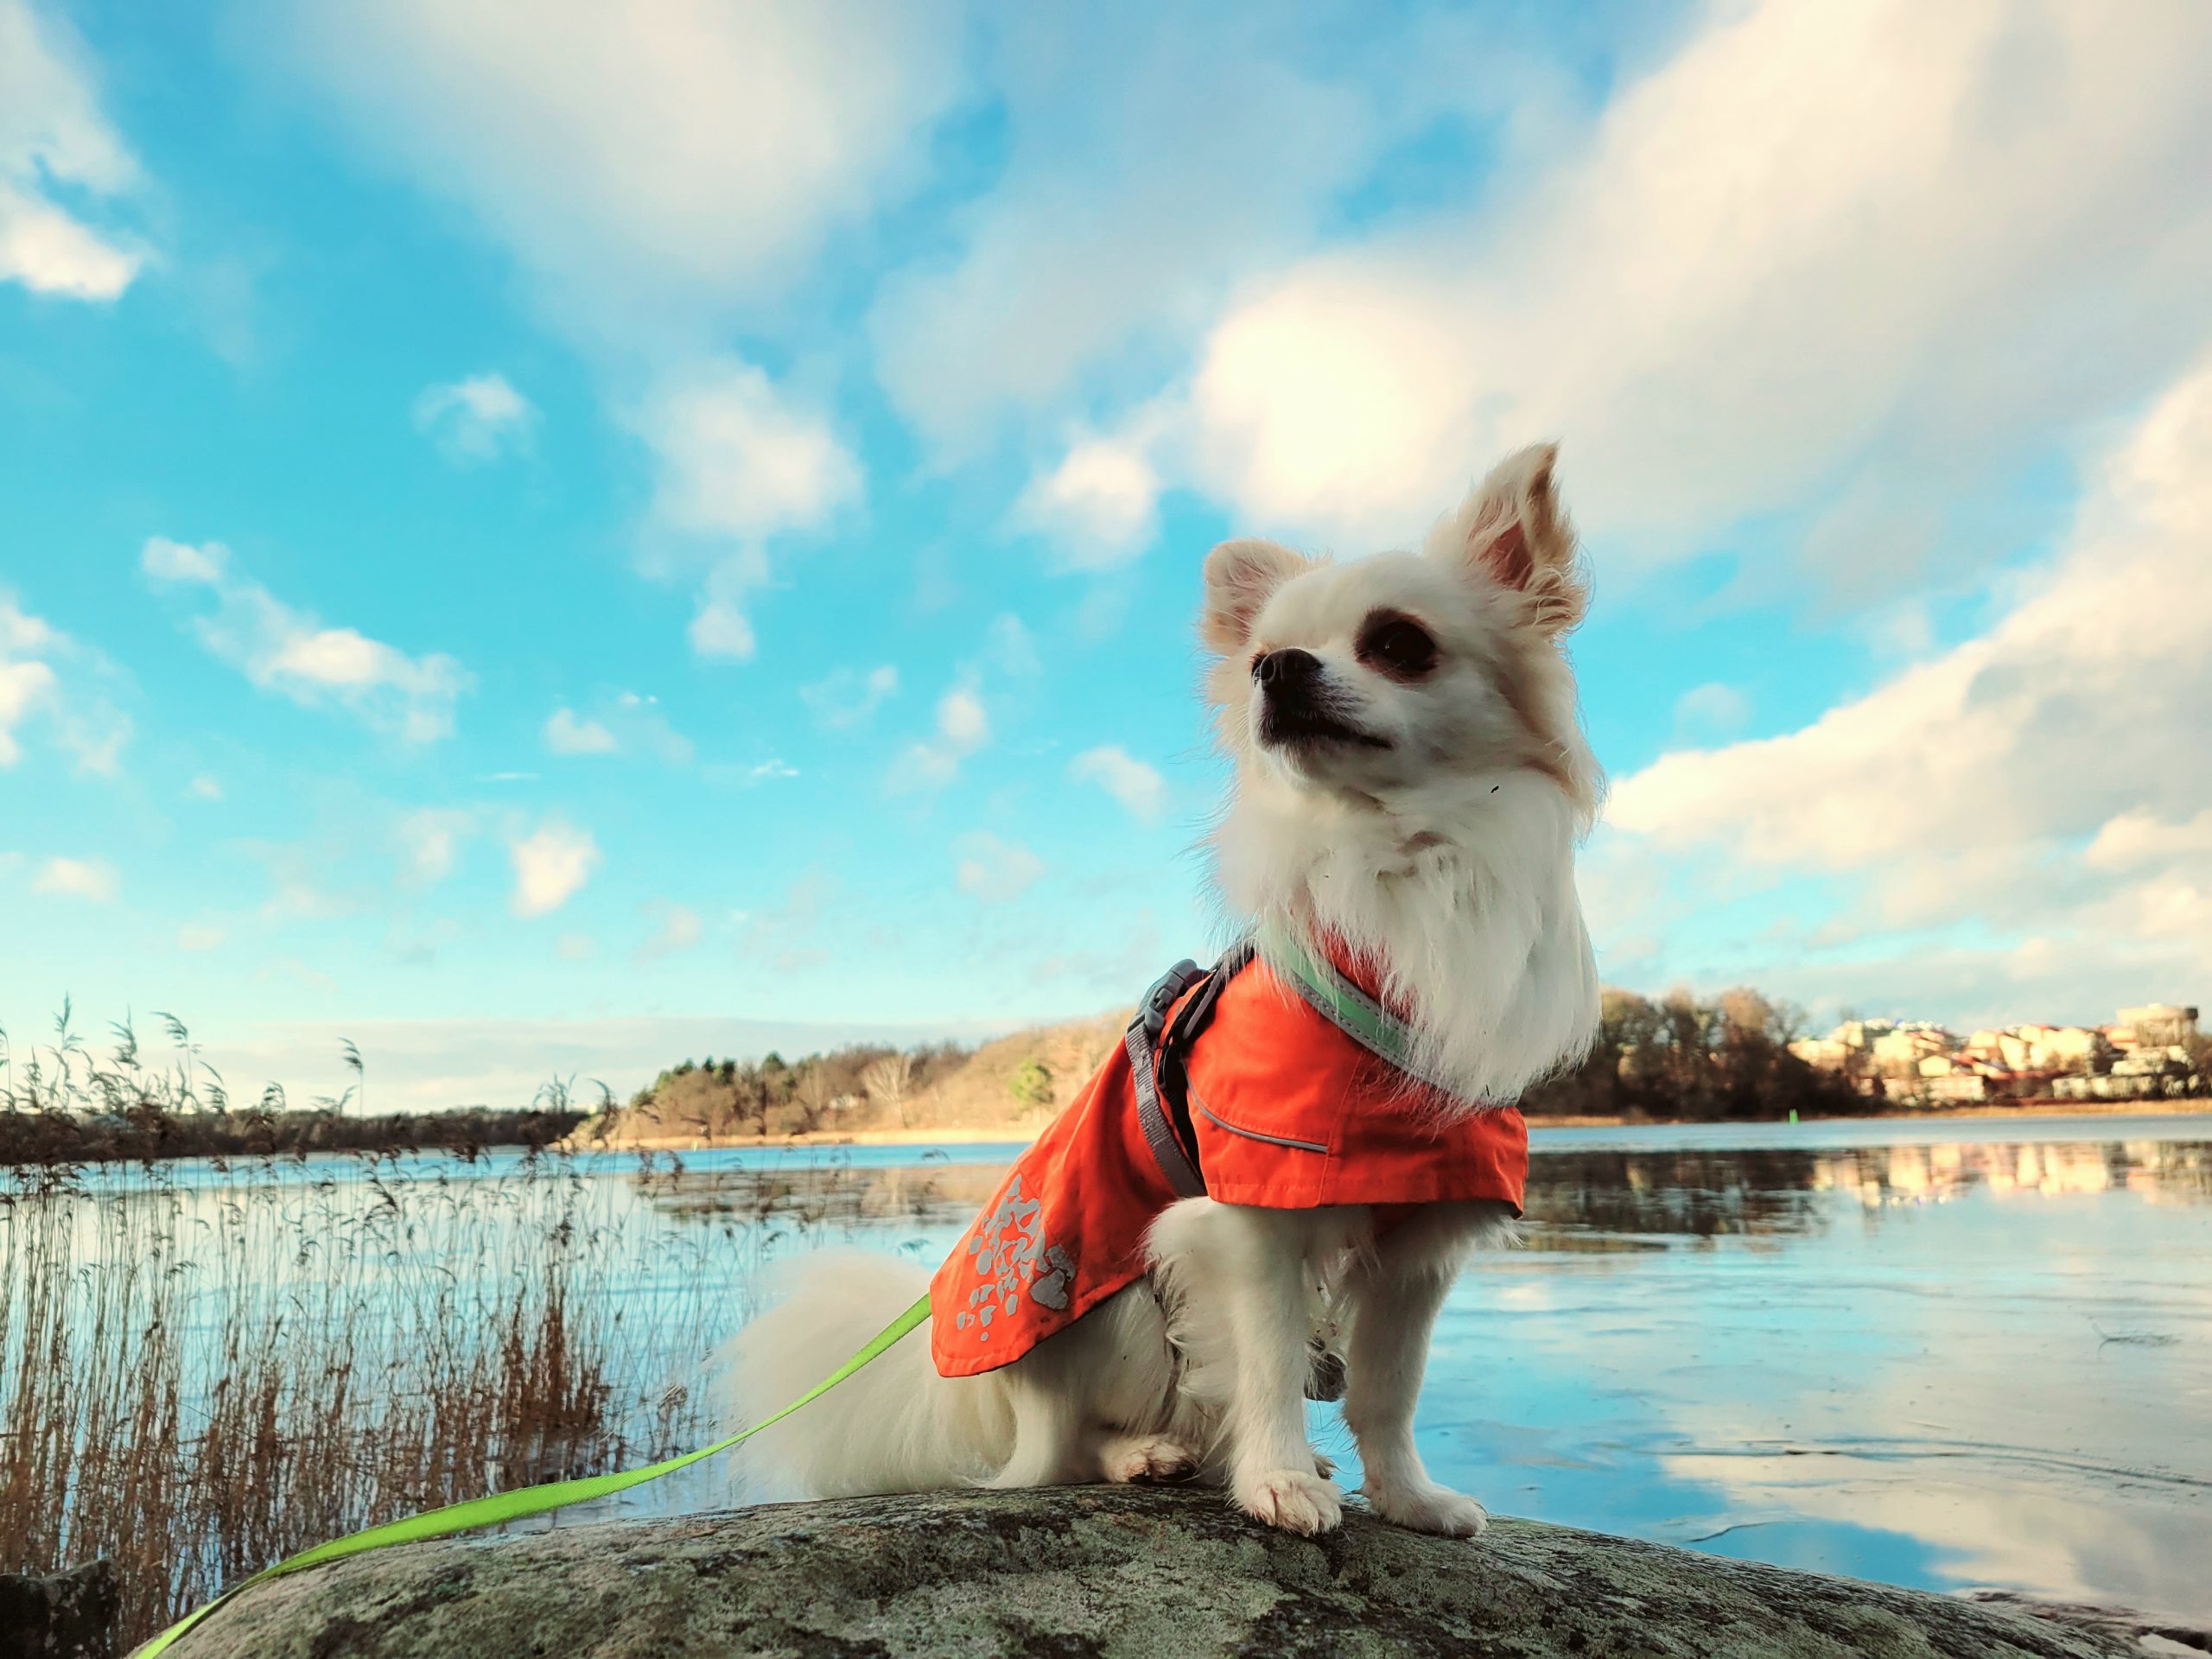 A white, long-haired chihuahua wearing an orange raincoat and posing in front of a lake.